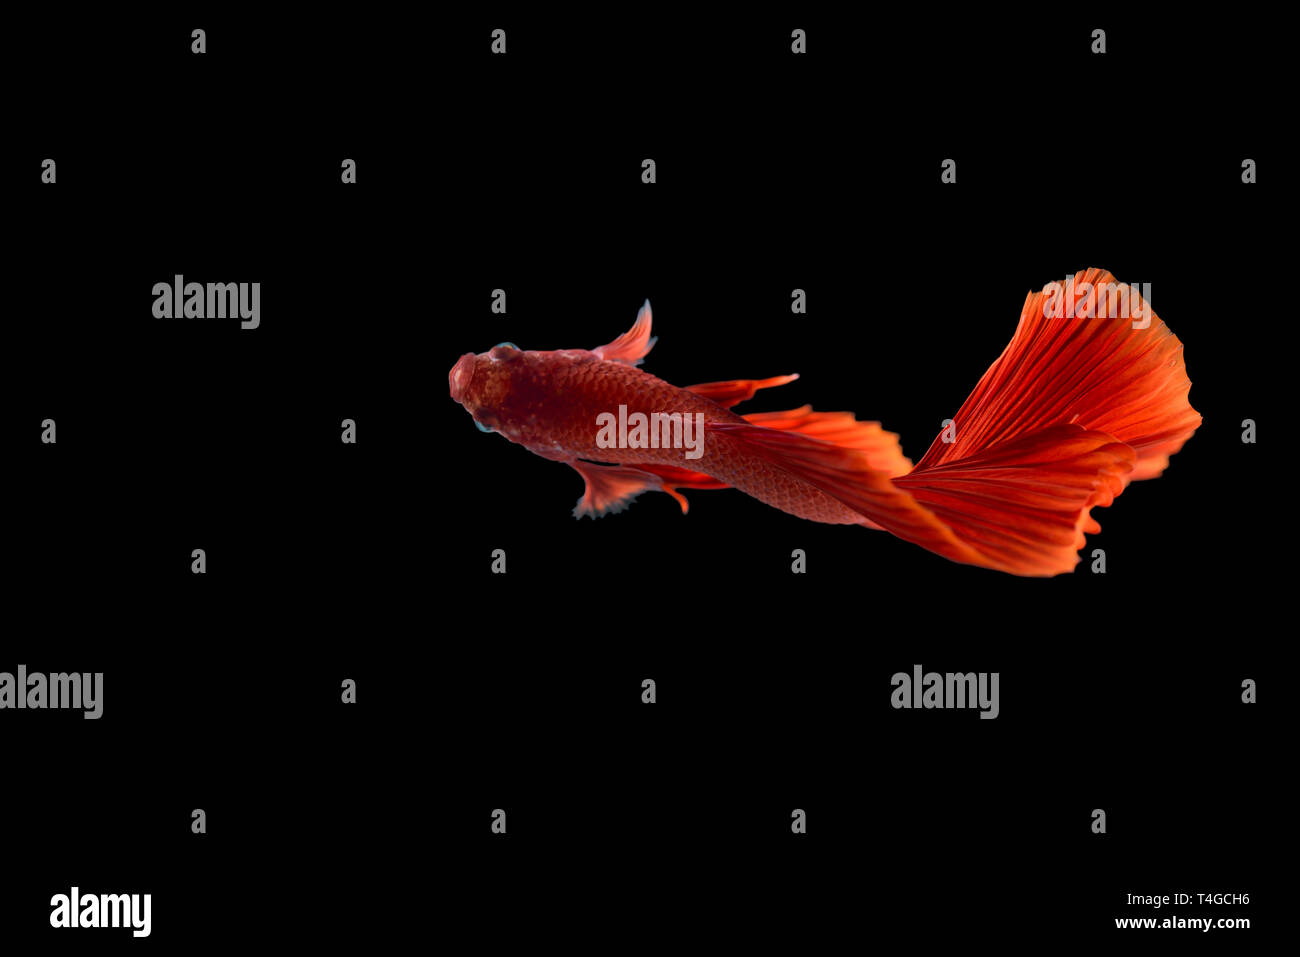 Red color Siamese fighting fish(Rosetail), fighting fish, Betta splendens, on black background with clipping path Stock Photo